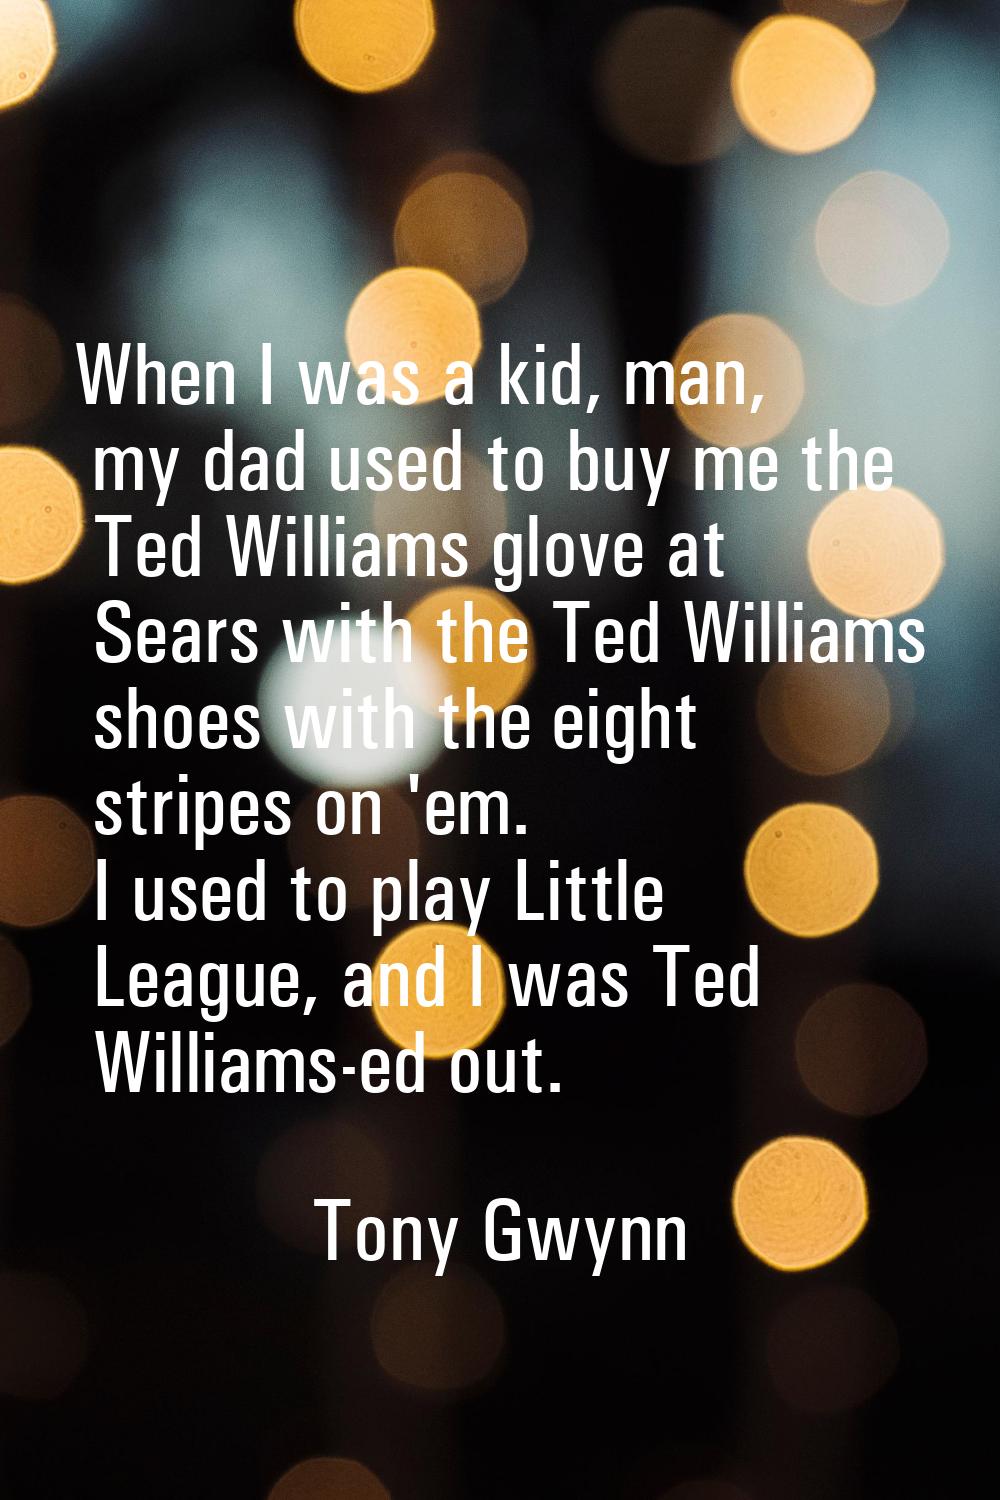 When I was a kid, man, my dad used to buy me the Ted Williams glove at Sears with the Ted Williams 